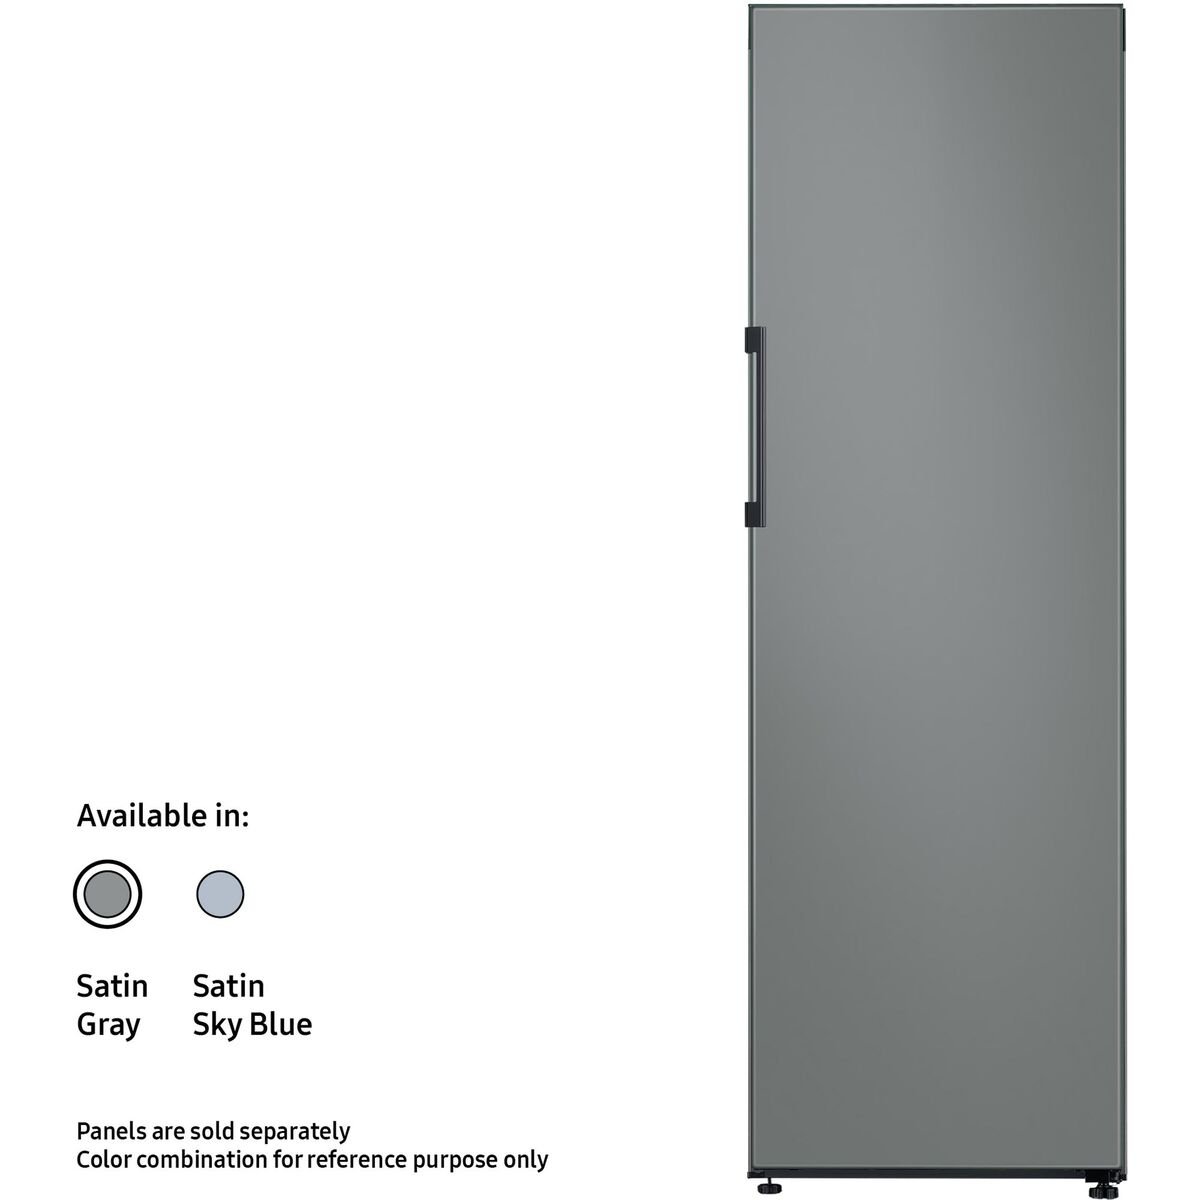 Samsung Bespoke Single Door Refrigerator RR39T7605AP 380LTR - Customizable Color Panels Are Sold Separately